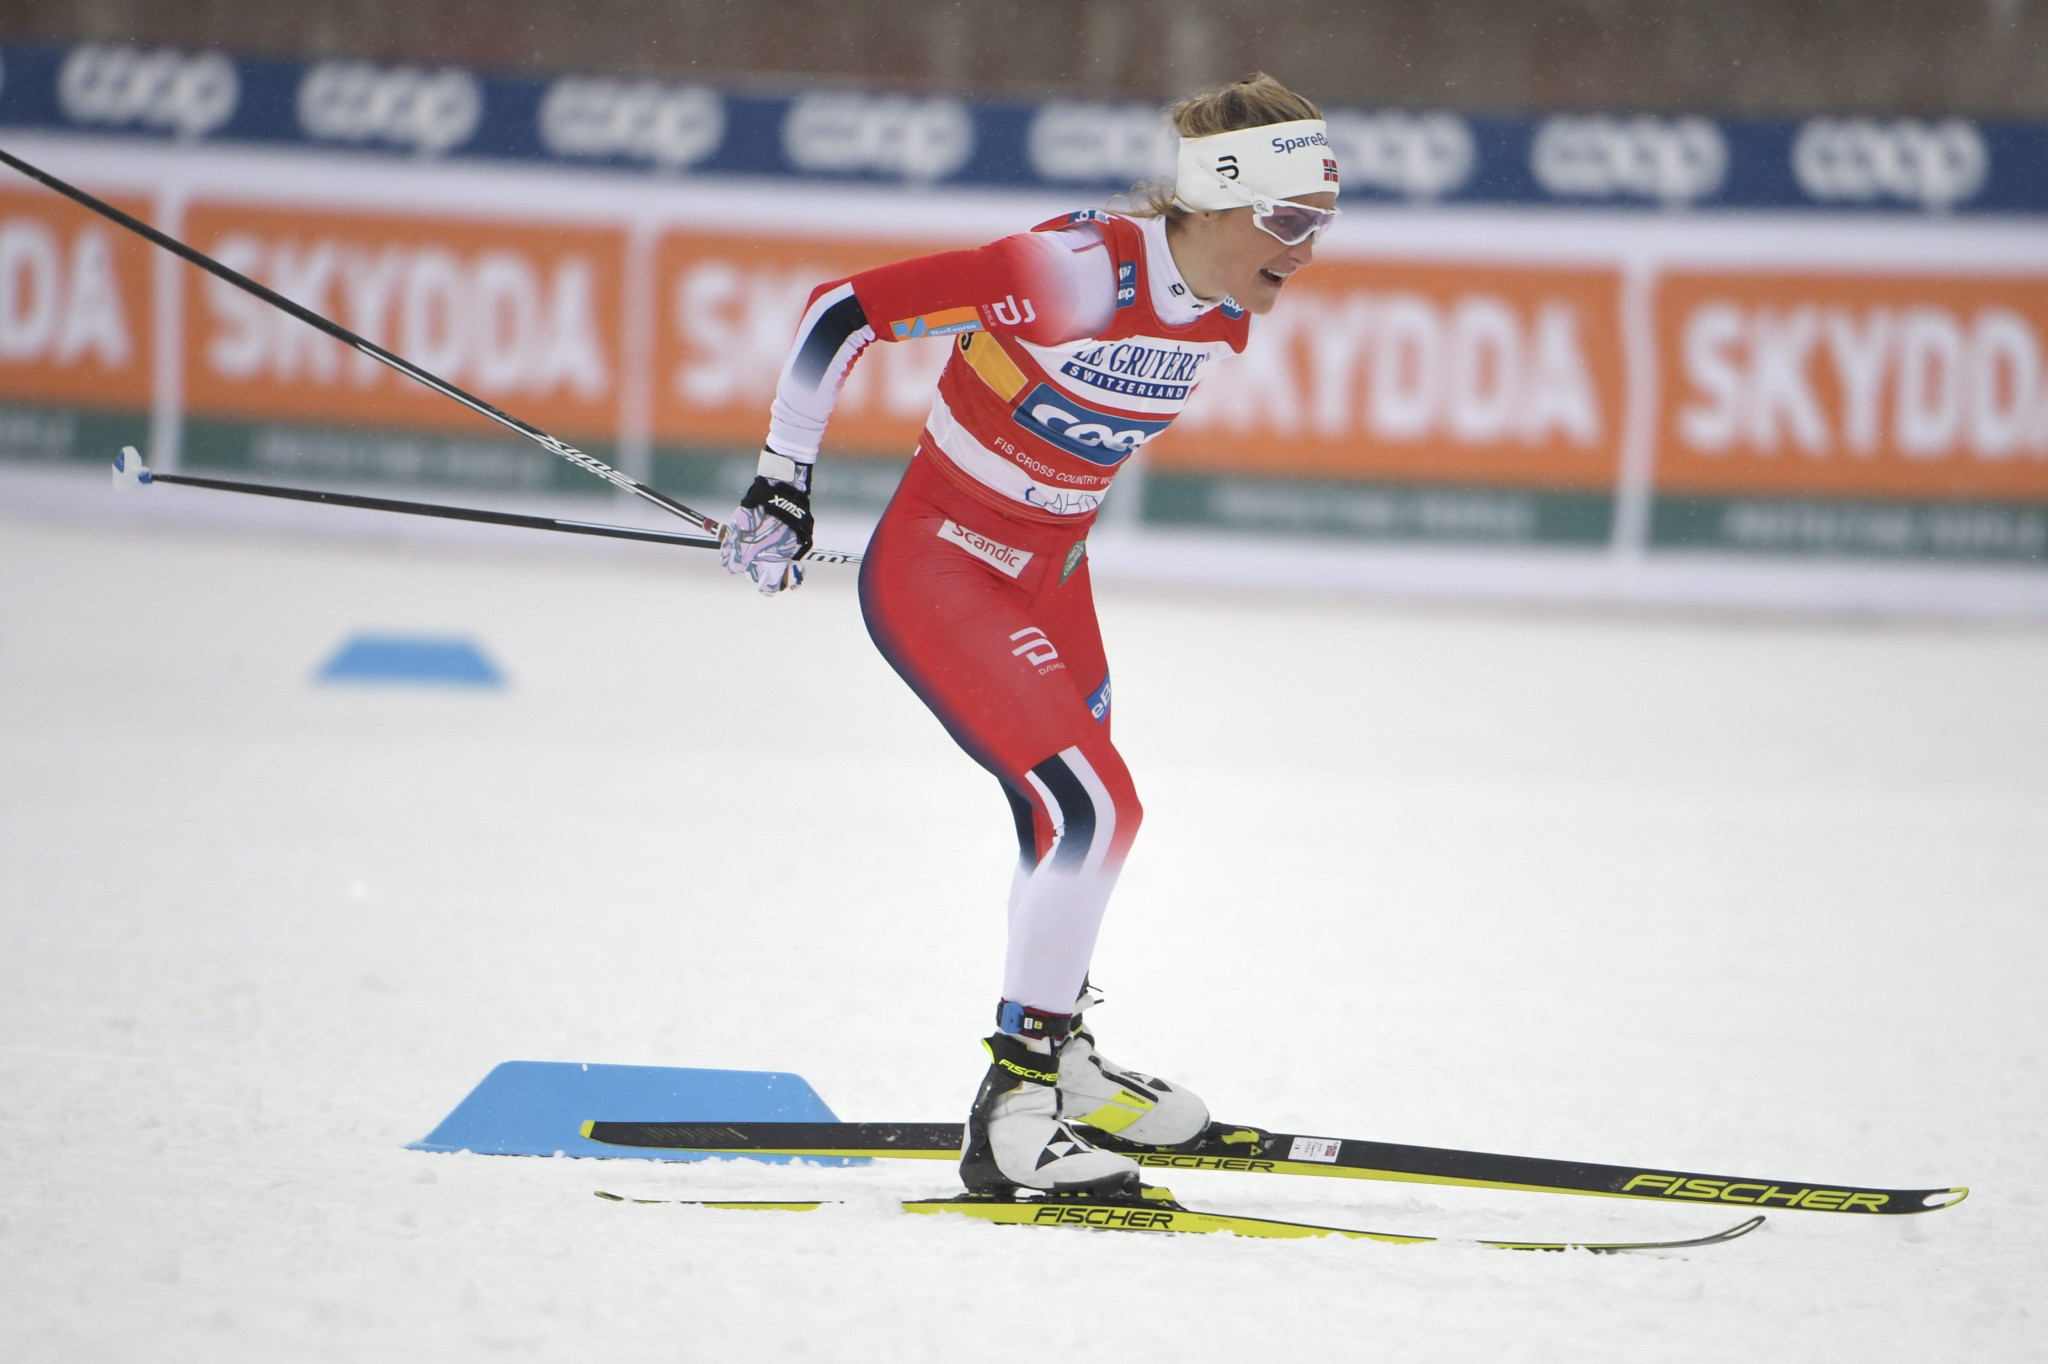 Johaug poised for overall title at FIS Cross-Country World Cup in Konnerud